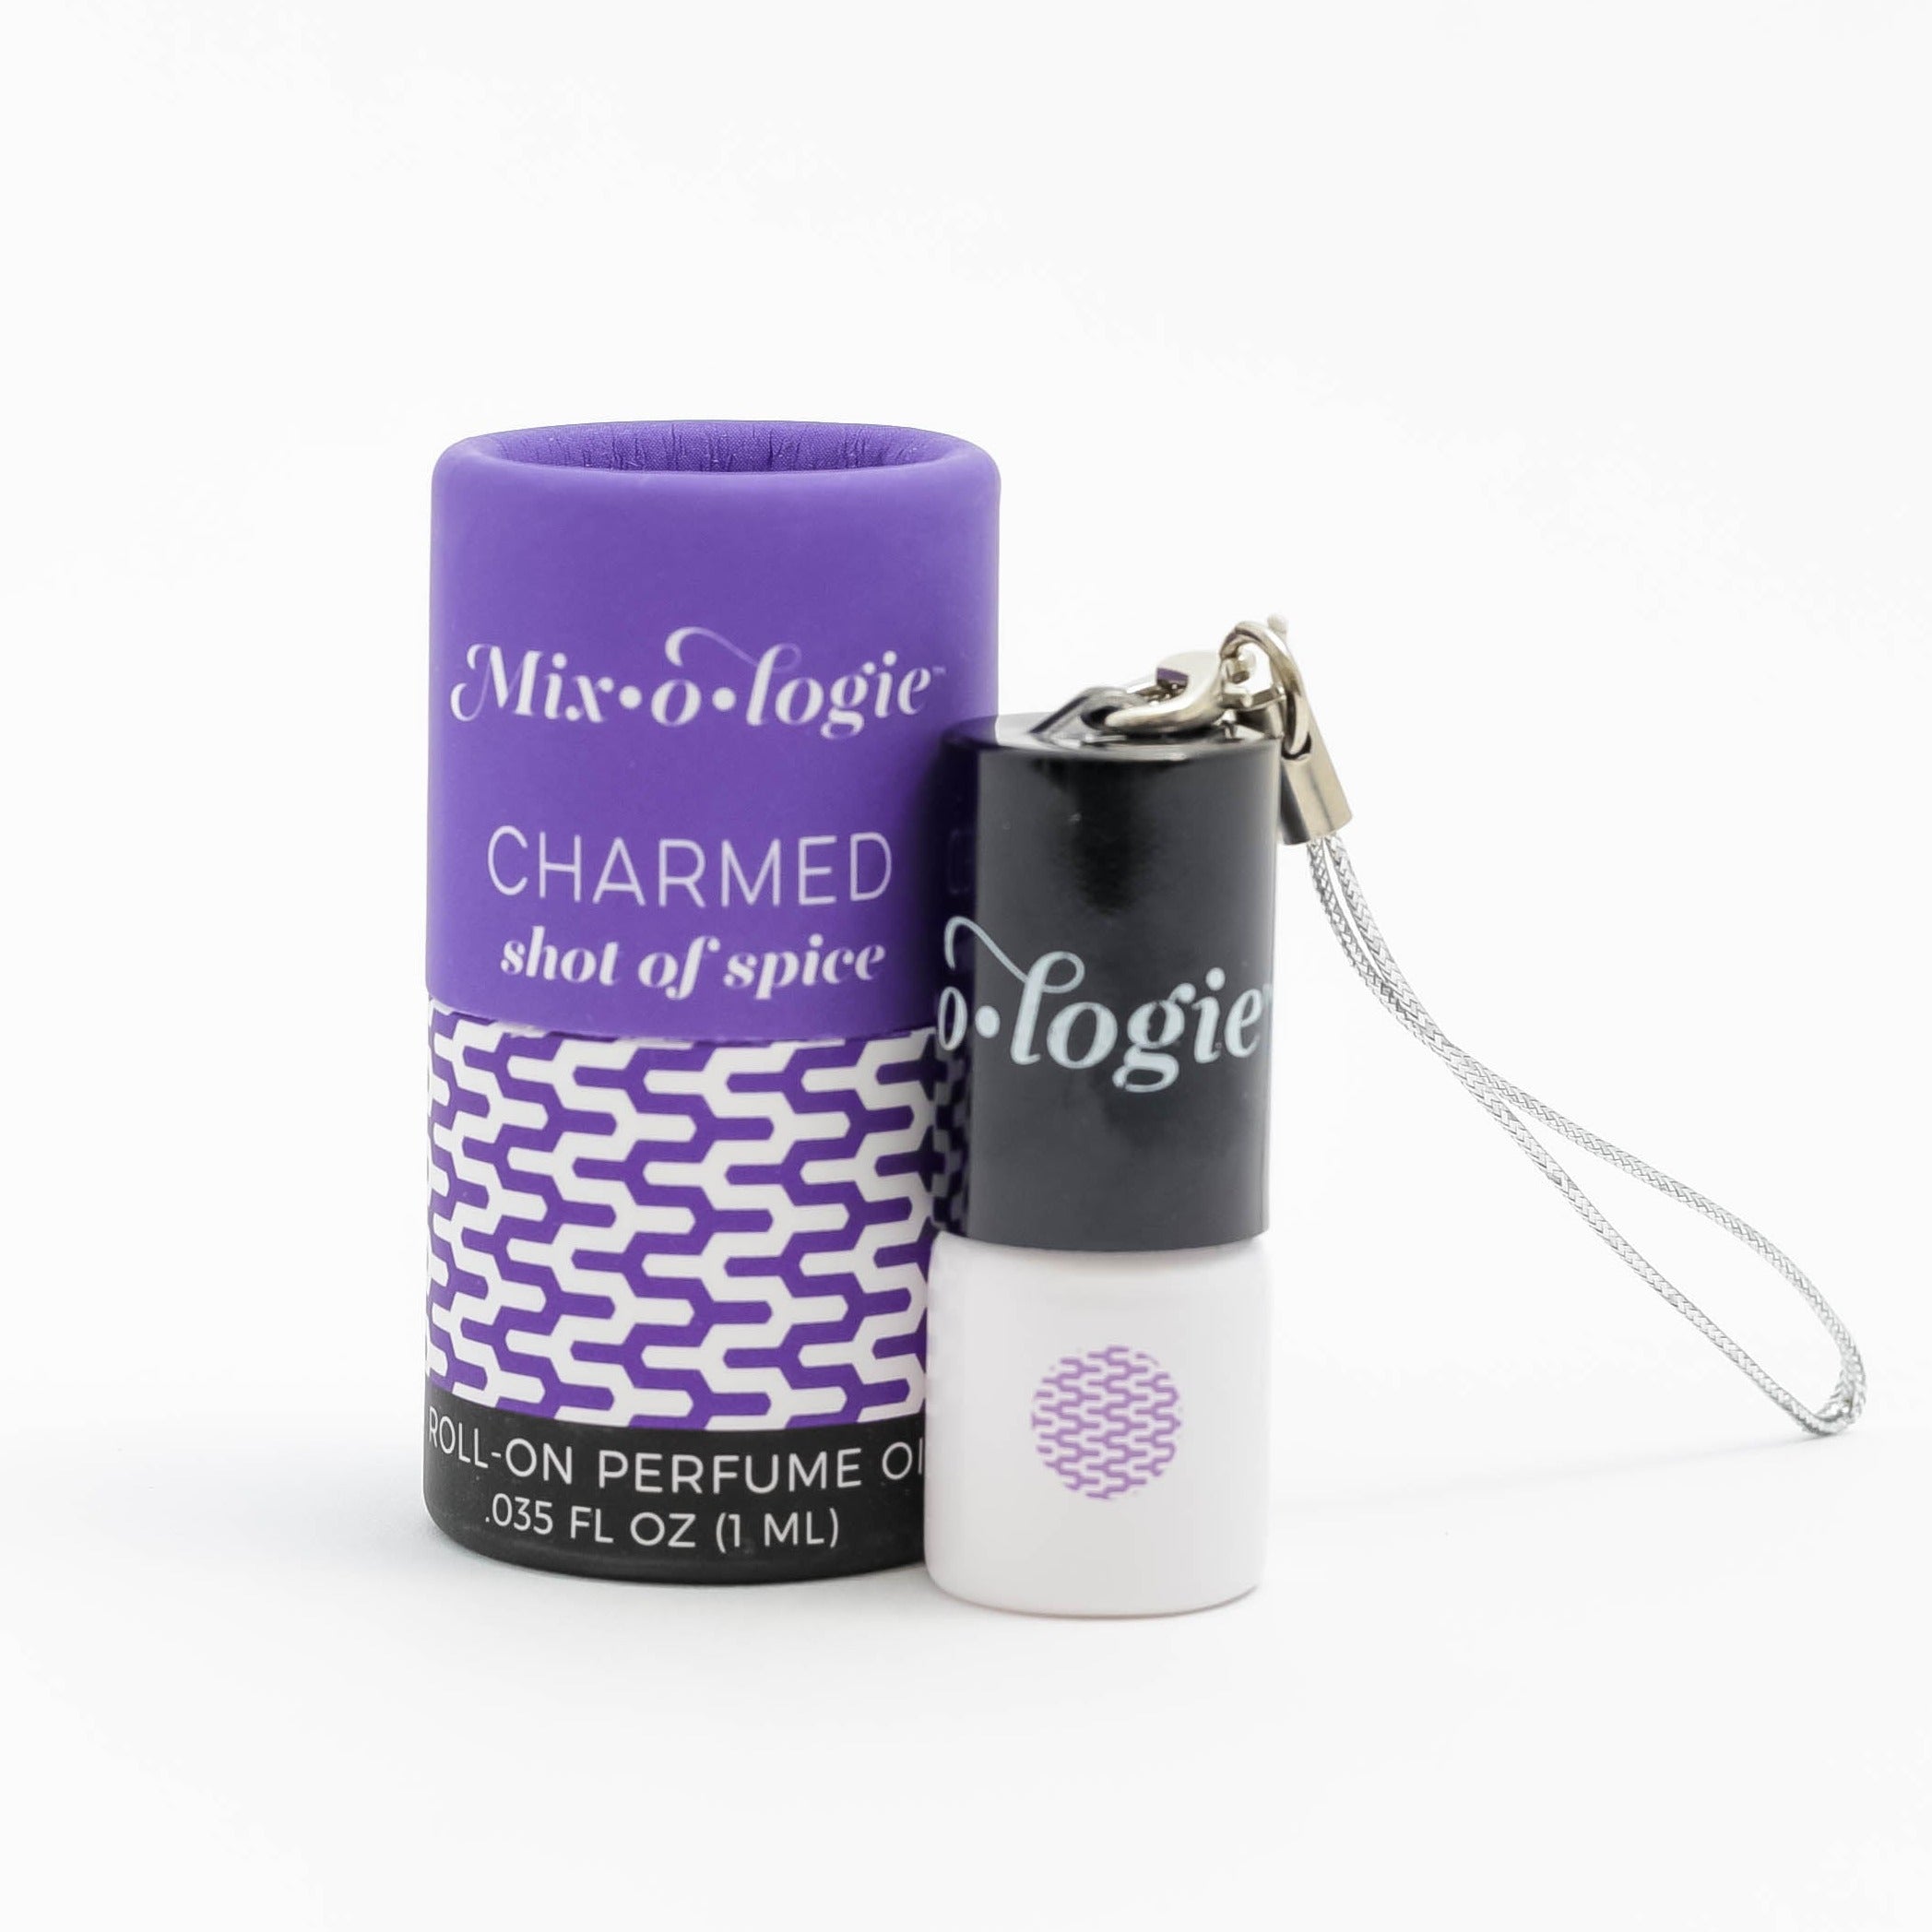 1 mL mini rollerball with keychain lid scented with Mixologie's Charmed (Shot of spice) scent packaged In small Cylindrical purple packaging. 